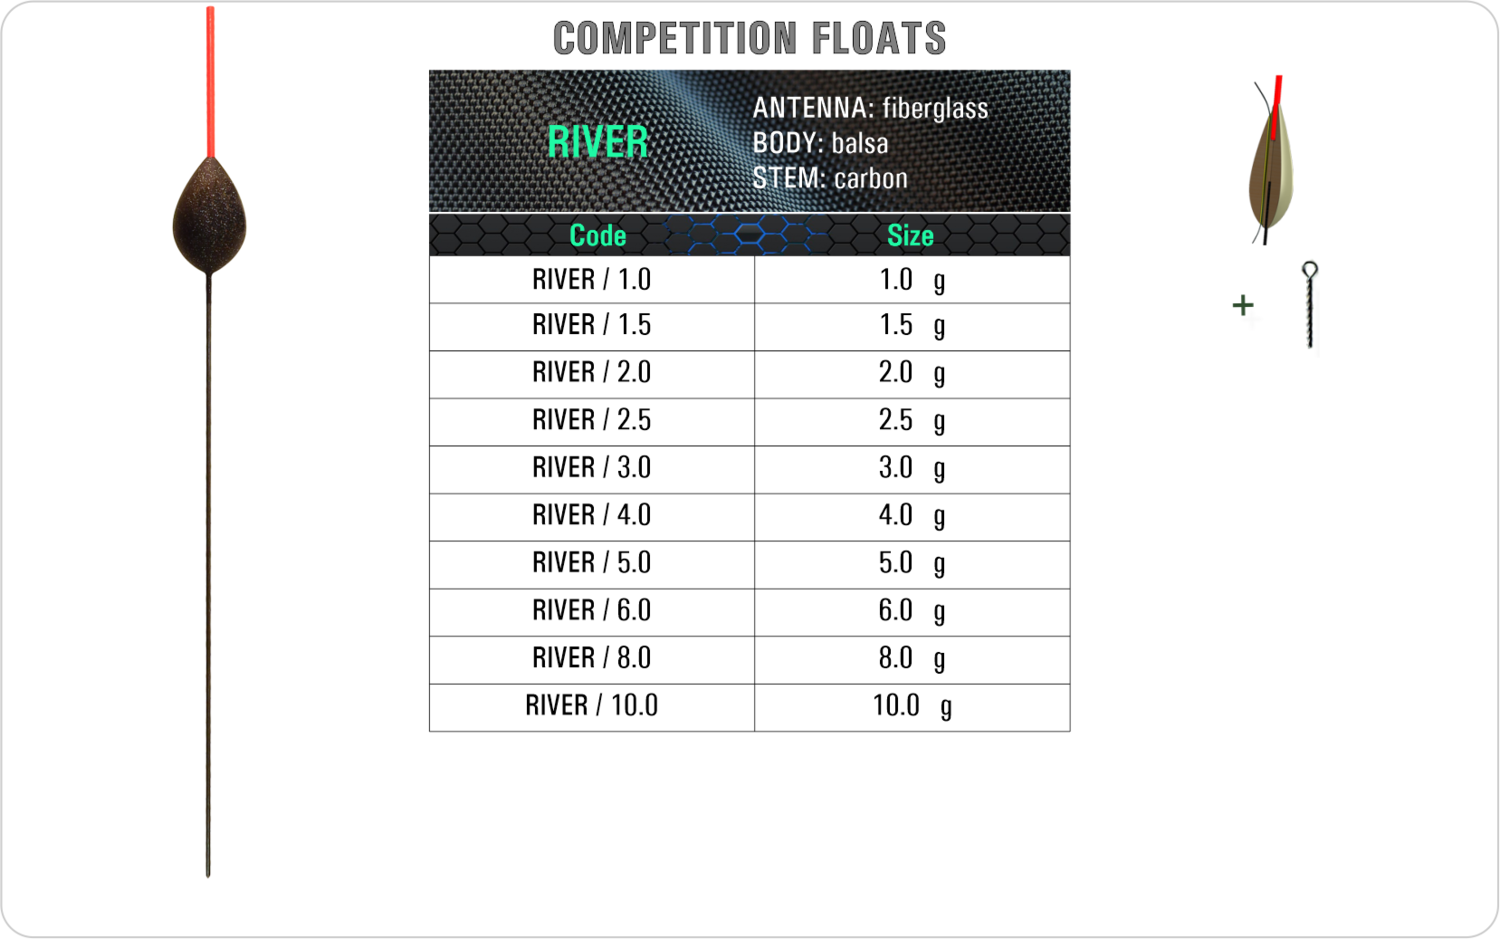 RIVER Competition float model and table containing an additional information about this float with different codes, sizes, types of the body, the stem and the antenna of the float.